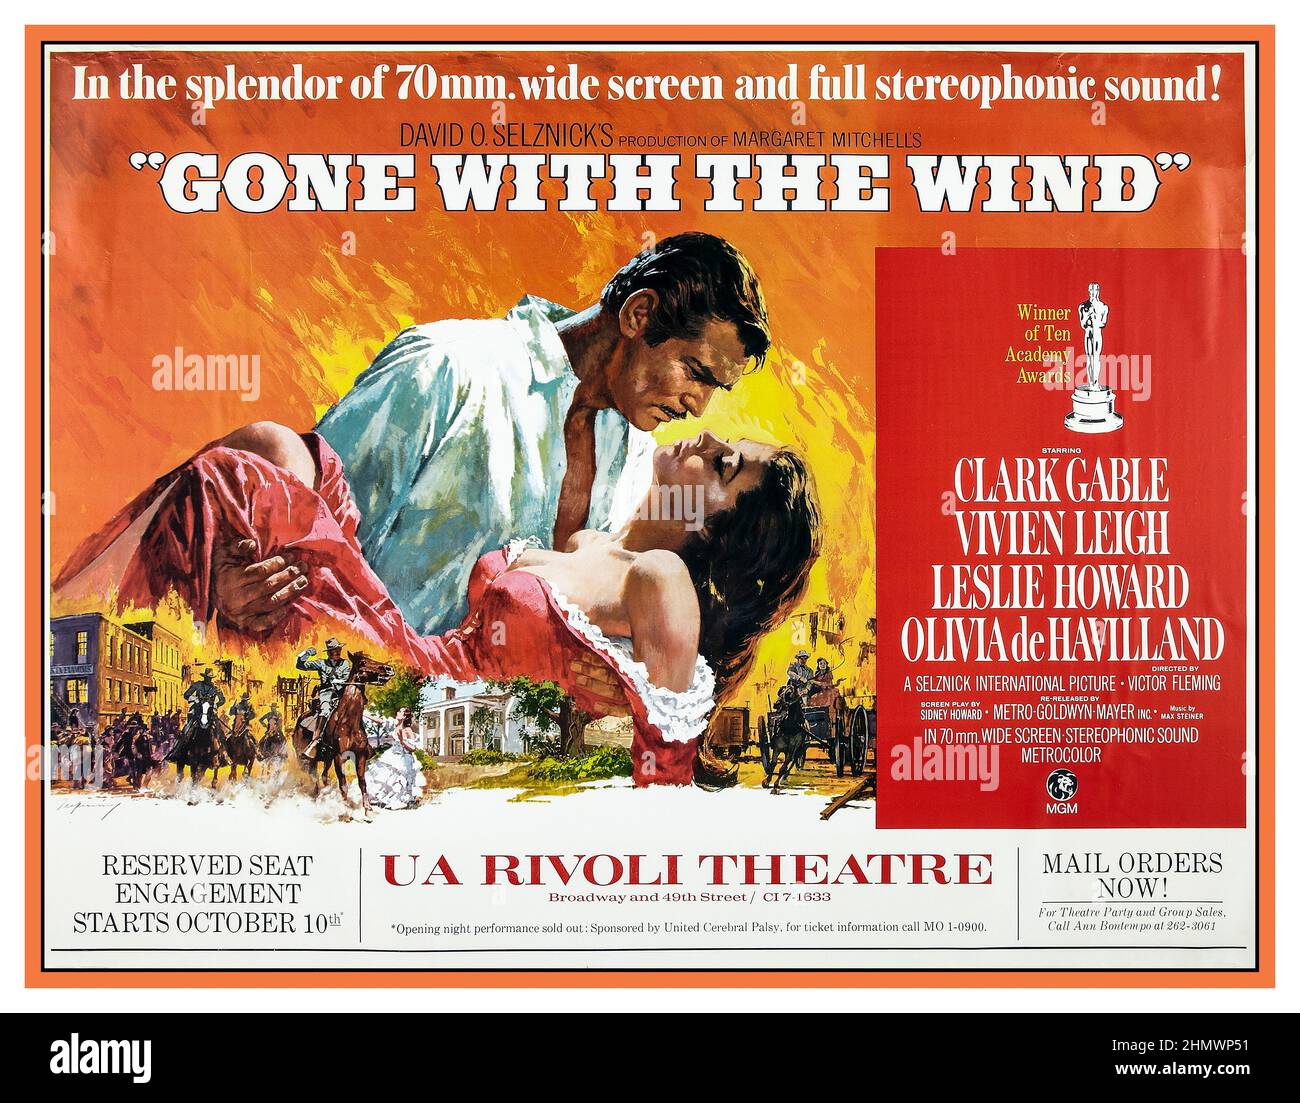 GONE WITH THE WIND Vintage movie poster starring Clark Gable and Vivien Leigh 1930’s Vintage Movie Film Poster  1939, M.G.M., USA by artist Armando Seguso  Gone with the Wind is a 1939 American epic historical romance film adapted from the 1936 novel by Margaret Mitchell. The film was produced by David O. Selznick of Selznick International Pictures and directed by Victor Fleming. The leading roles are played by Vivien Leigh (Scarlett), Clark Gable (Rhett), Leslie Howard (Ashley), and Olivia de Havilland (Melanie). Stock Photo